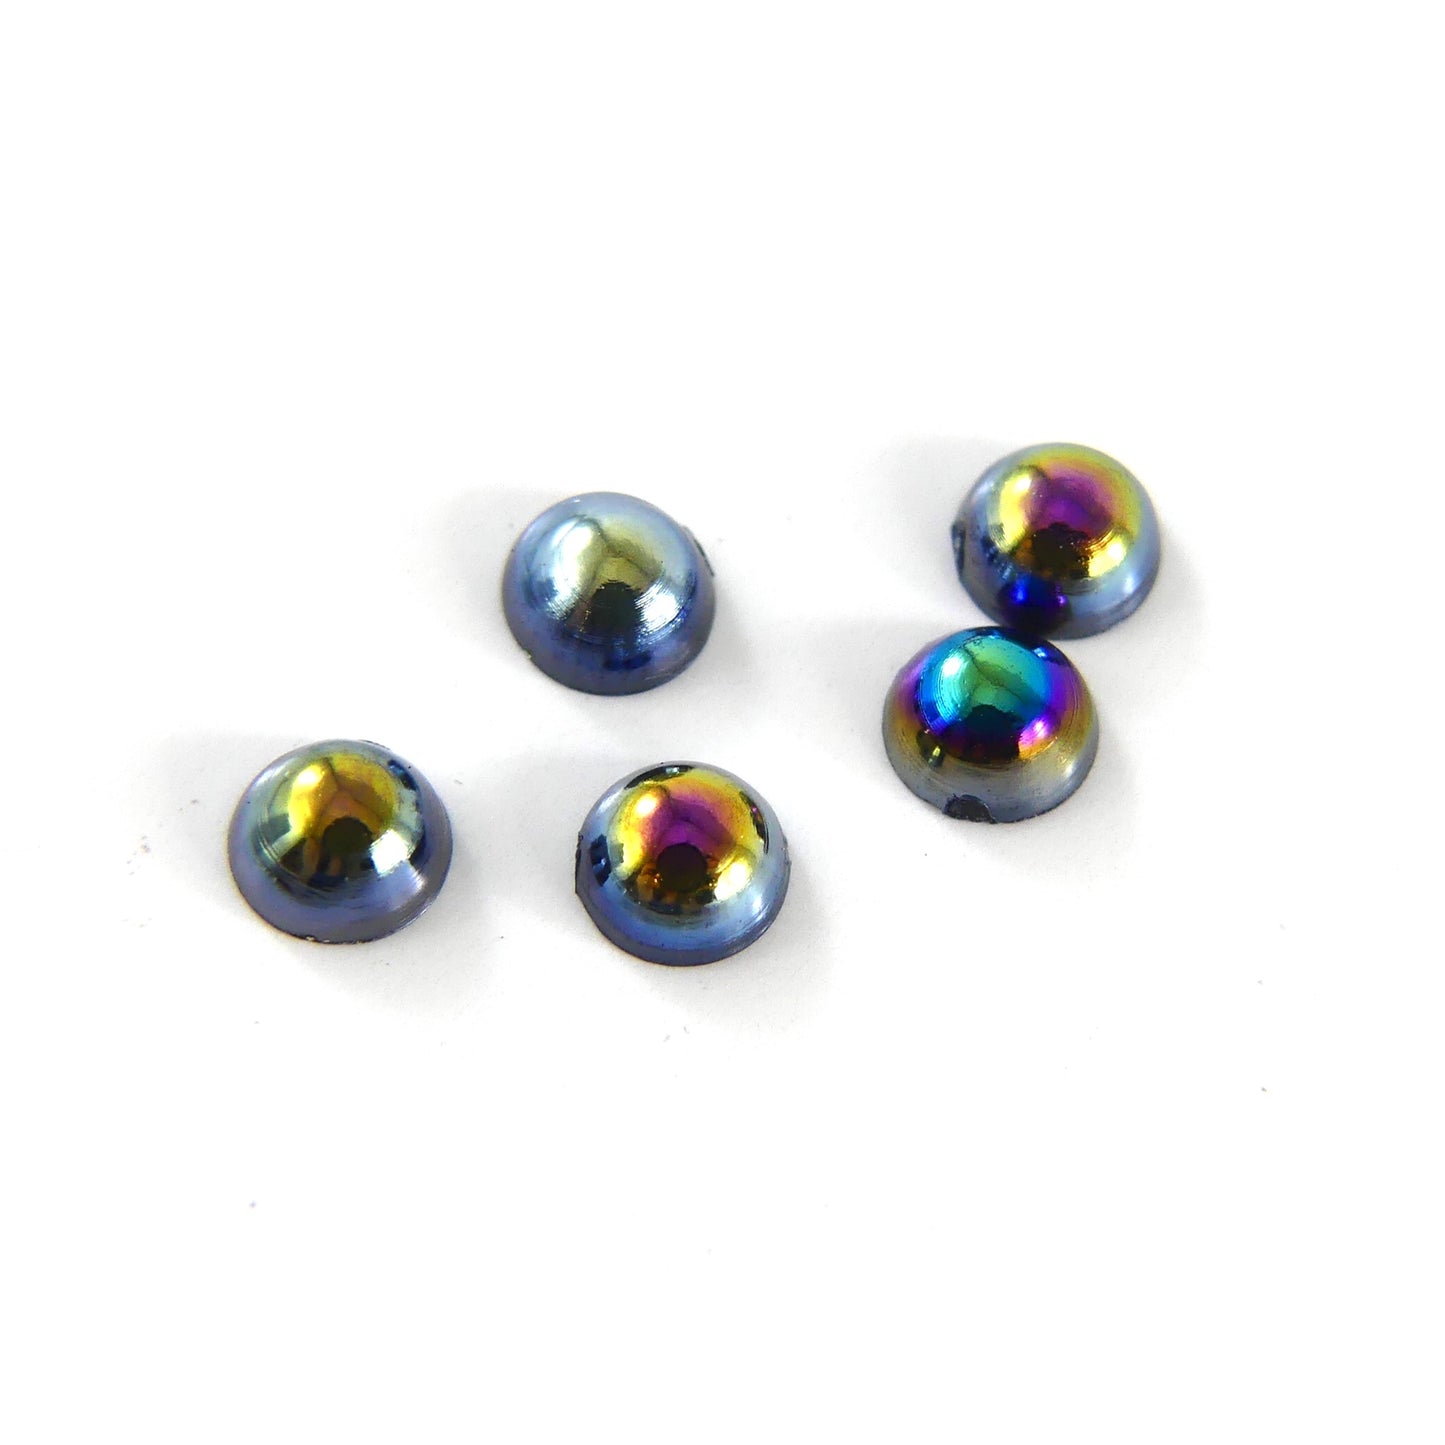 Load image into Gallery viewer, Reflective Grey Half Pearls - My Little Nail Art Shop
